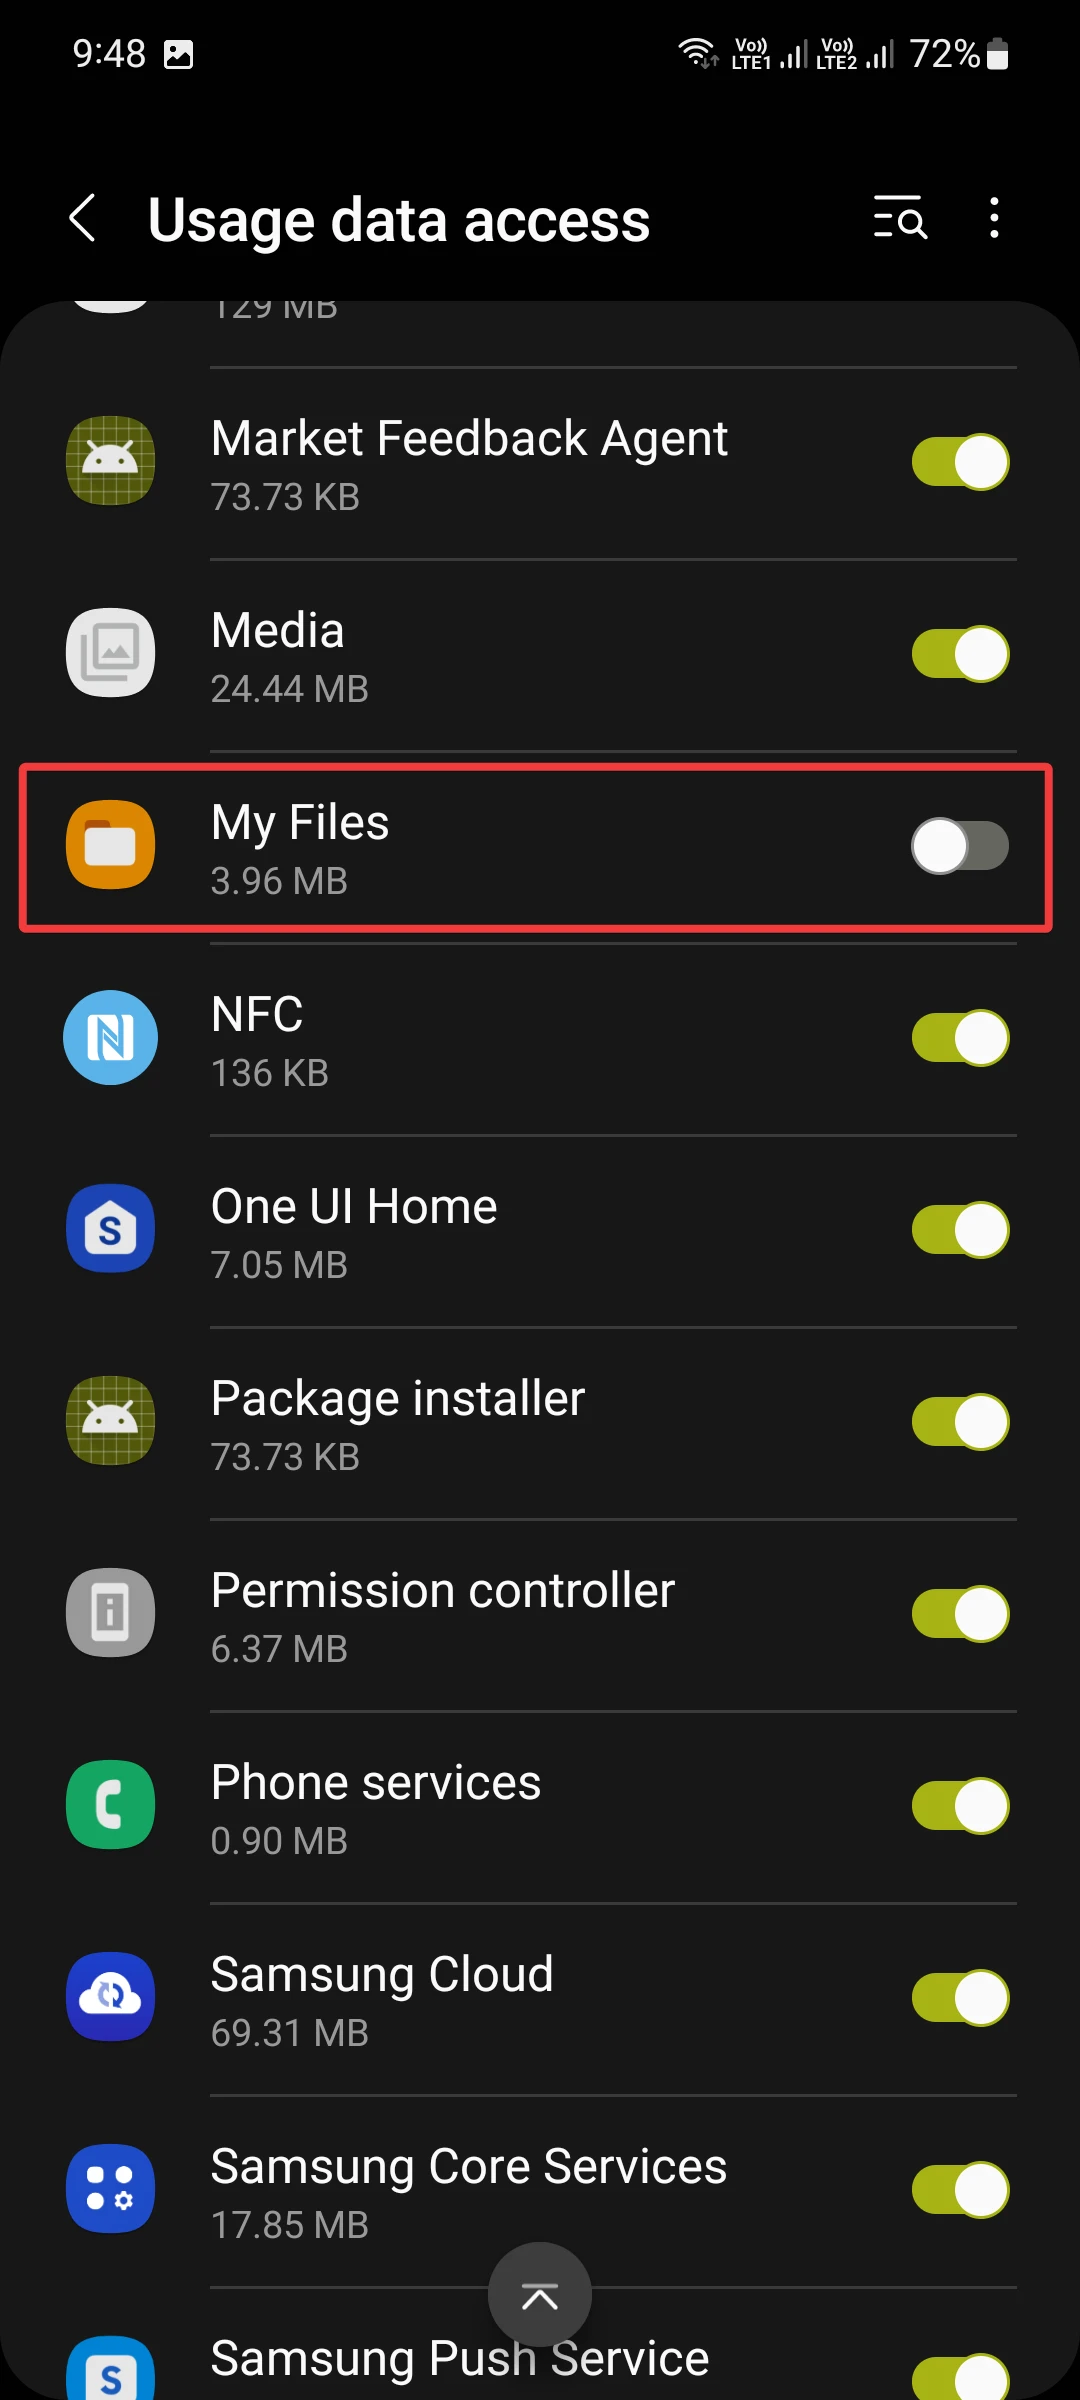 enable usage data access for the My Files